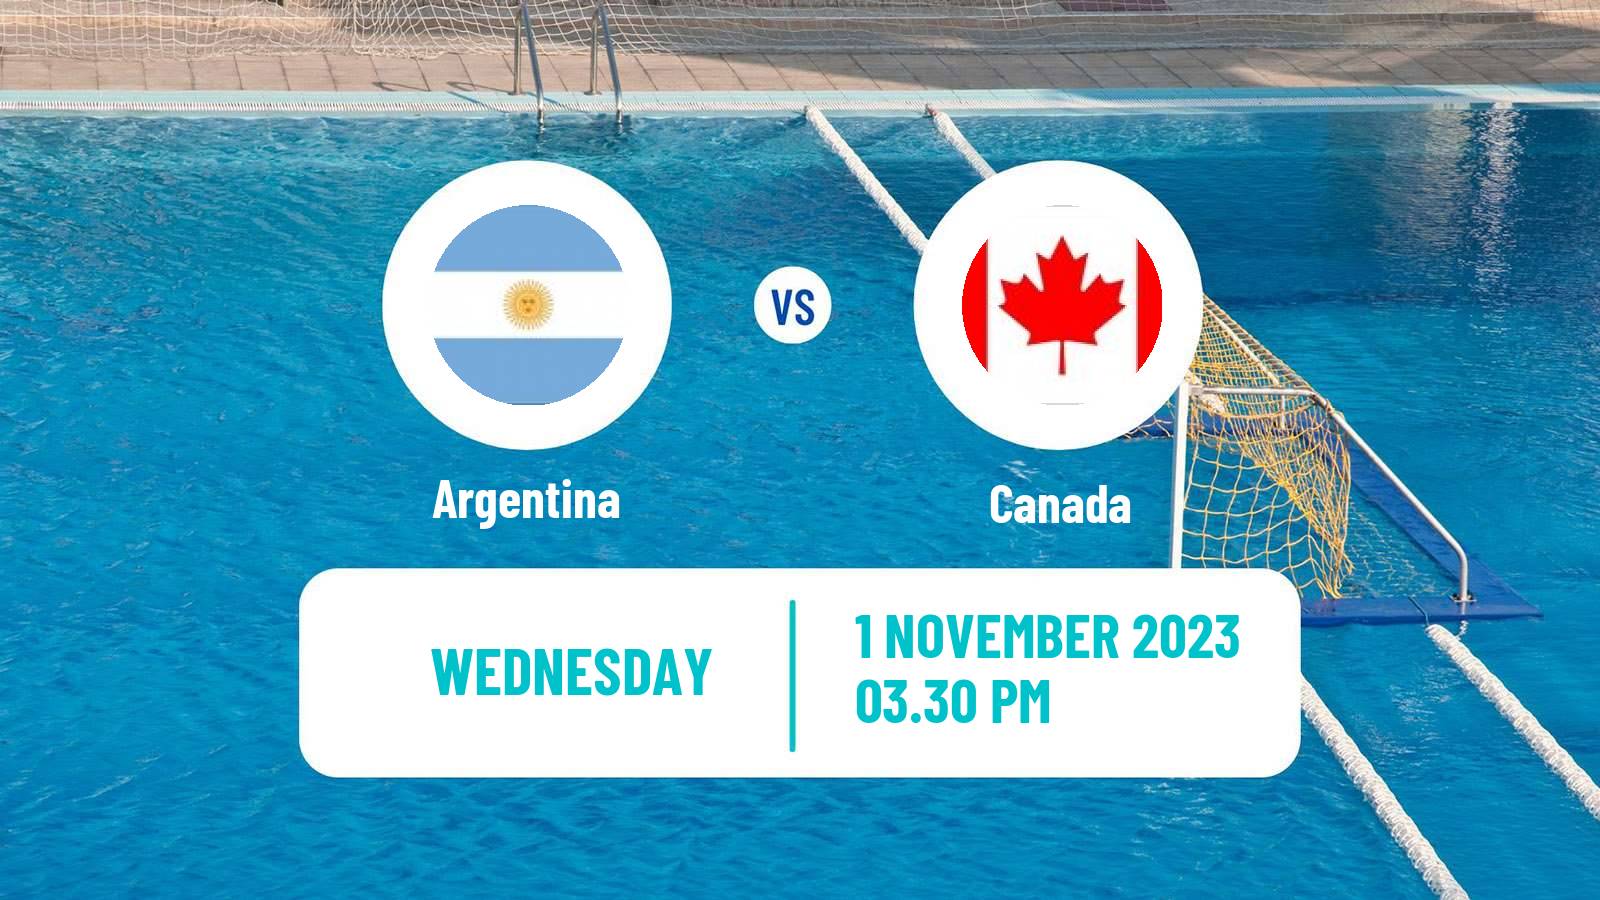 Water polo Pan American Games Water Polo Argentina - Canada